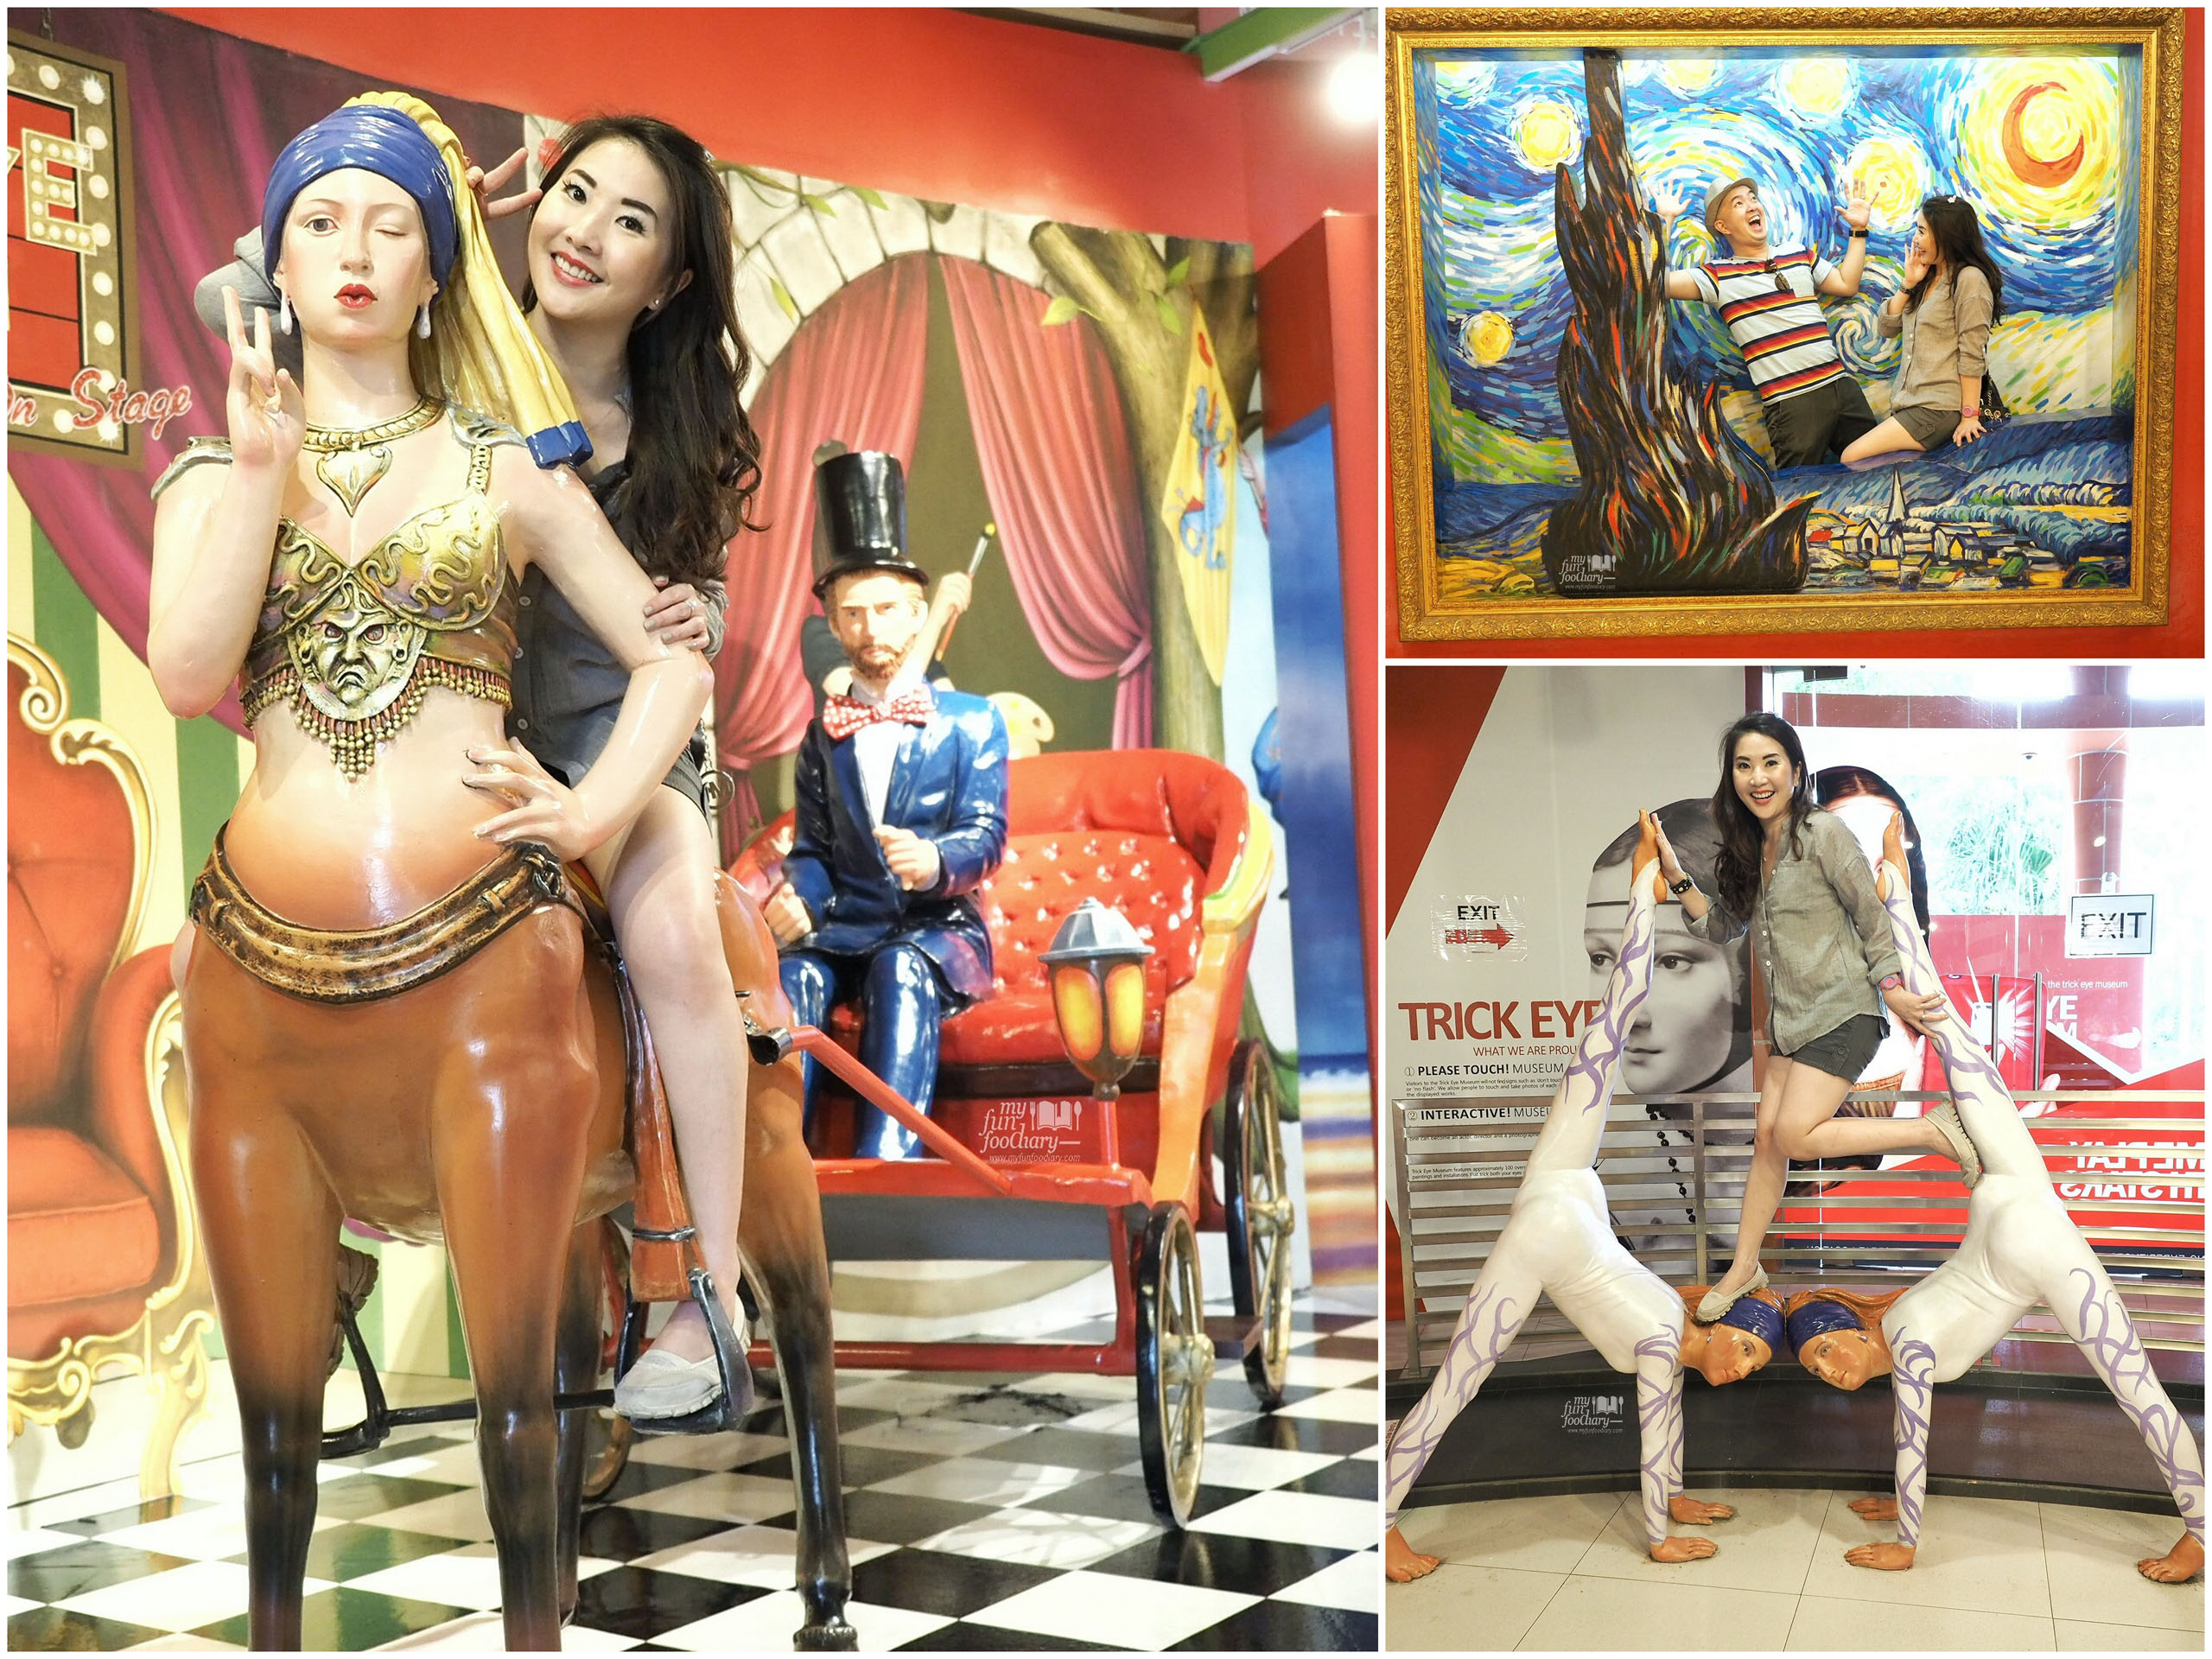 Centaur Chariot - Starry Night - Performers at Trick Eye Museum Singapore by Myfunfoodiary